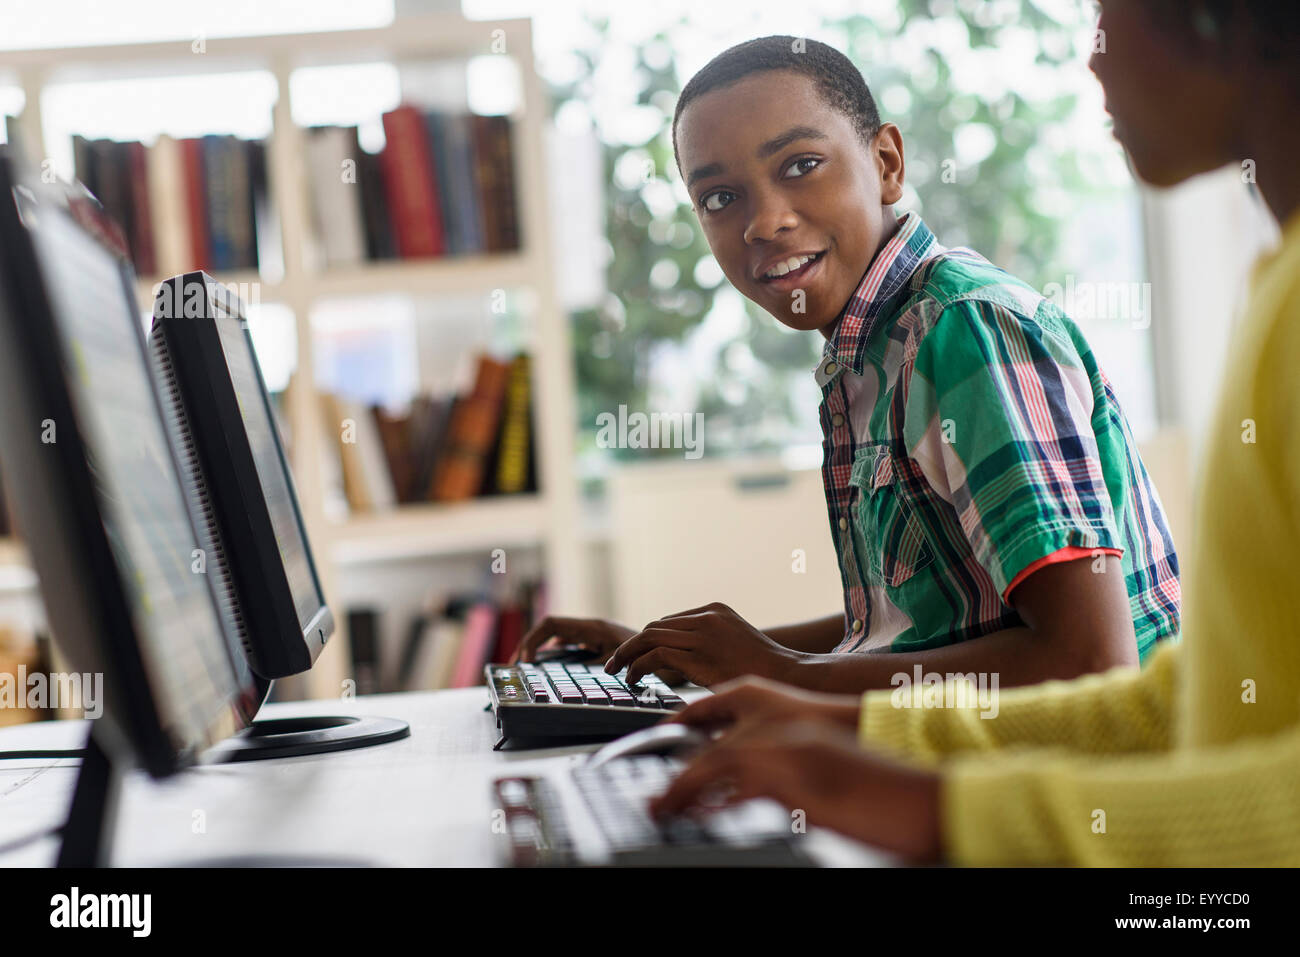 Black students using computers in classroom Stock Photo